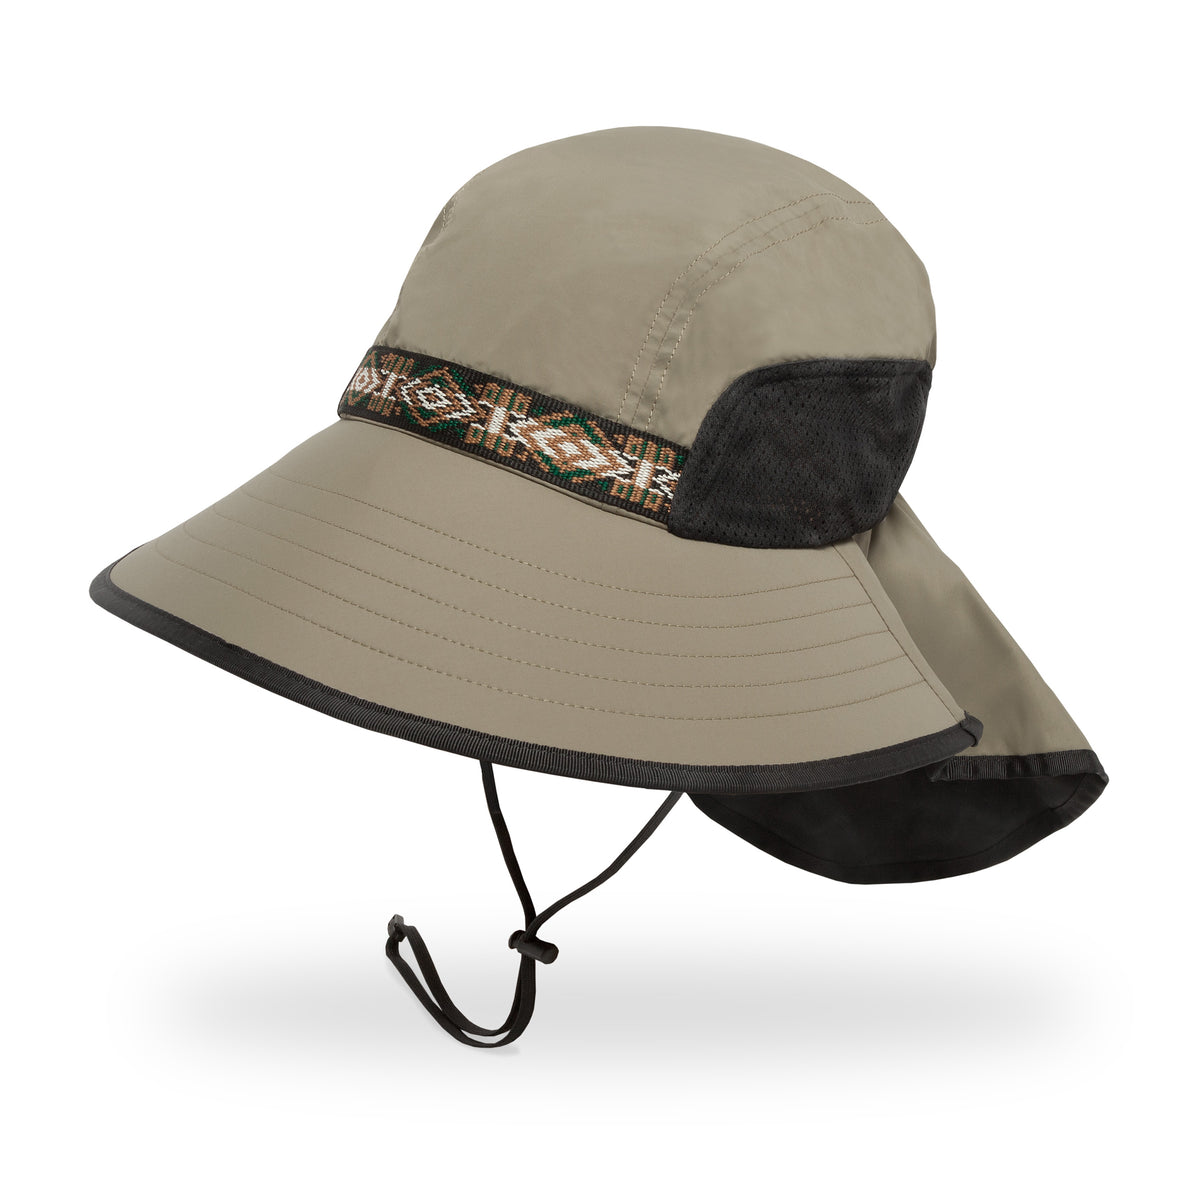 Sunday Afternoons Hats Review - Fishing Hats Sunday Afternoons Adventure Hat  for outdoor activities